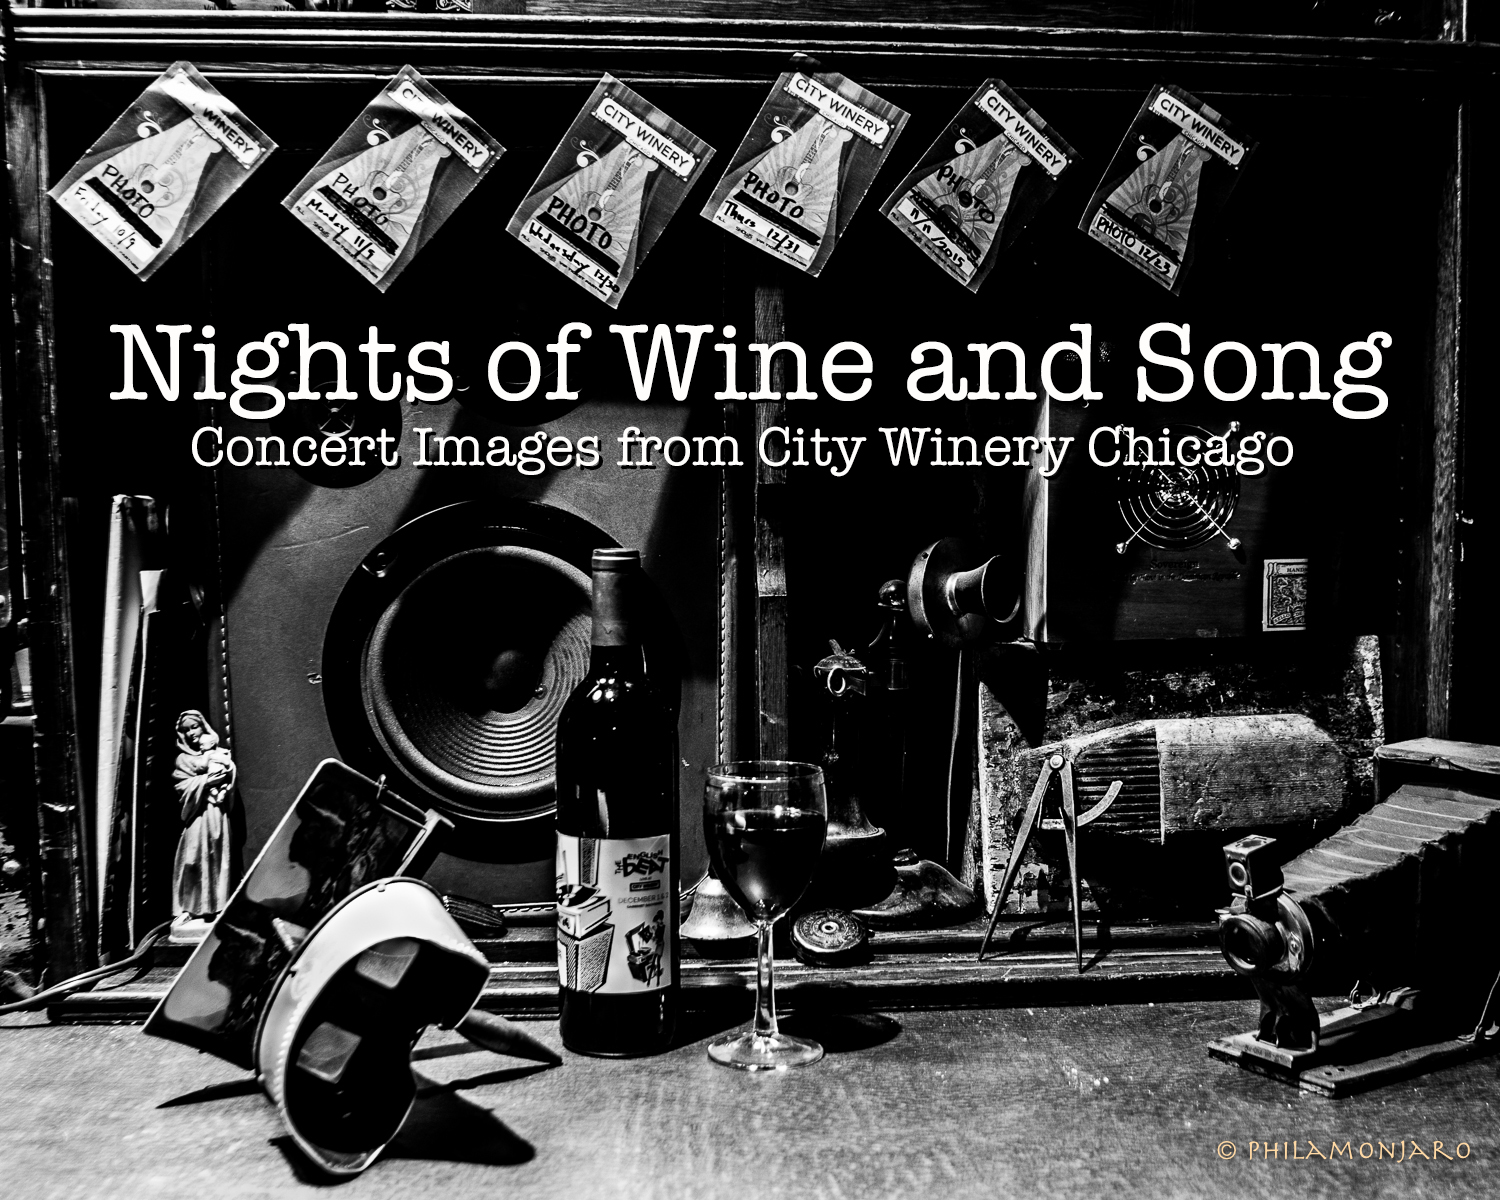 CW Nights of Wine and Song Cover w text-0006 copy copy.jpg